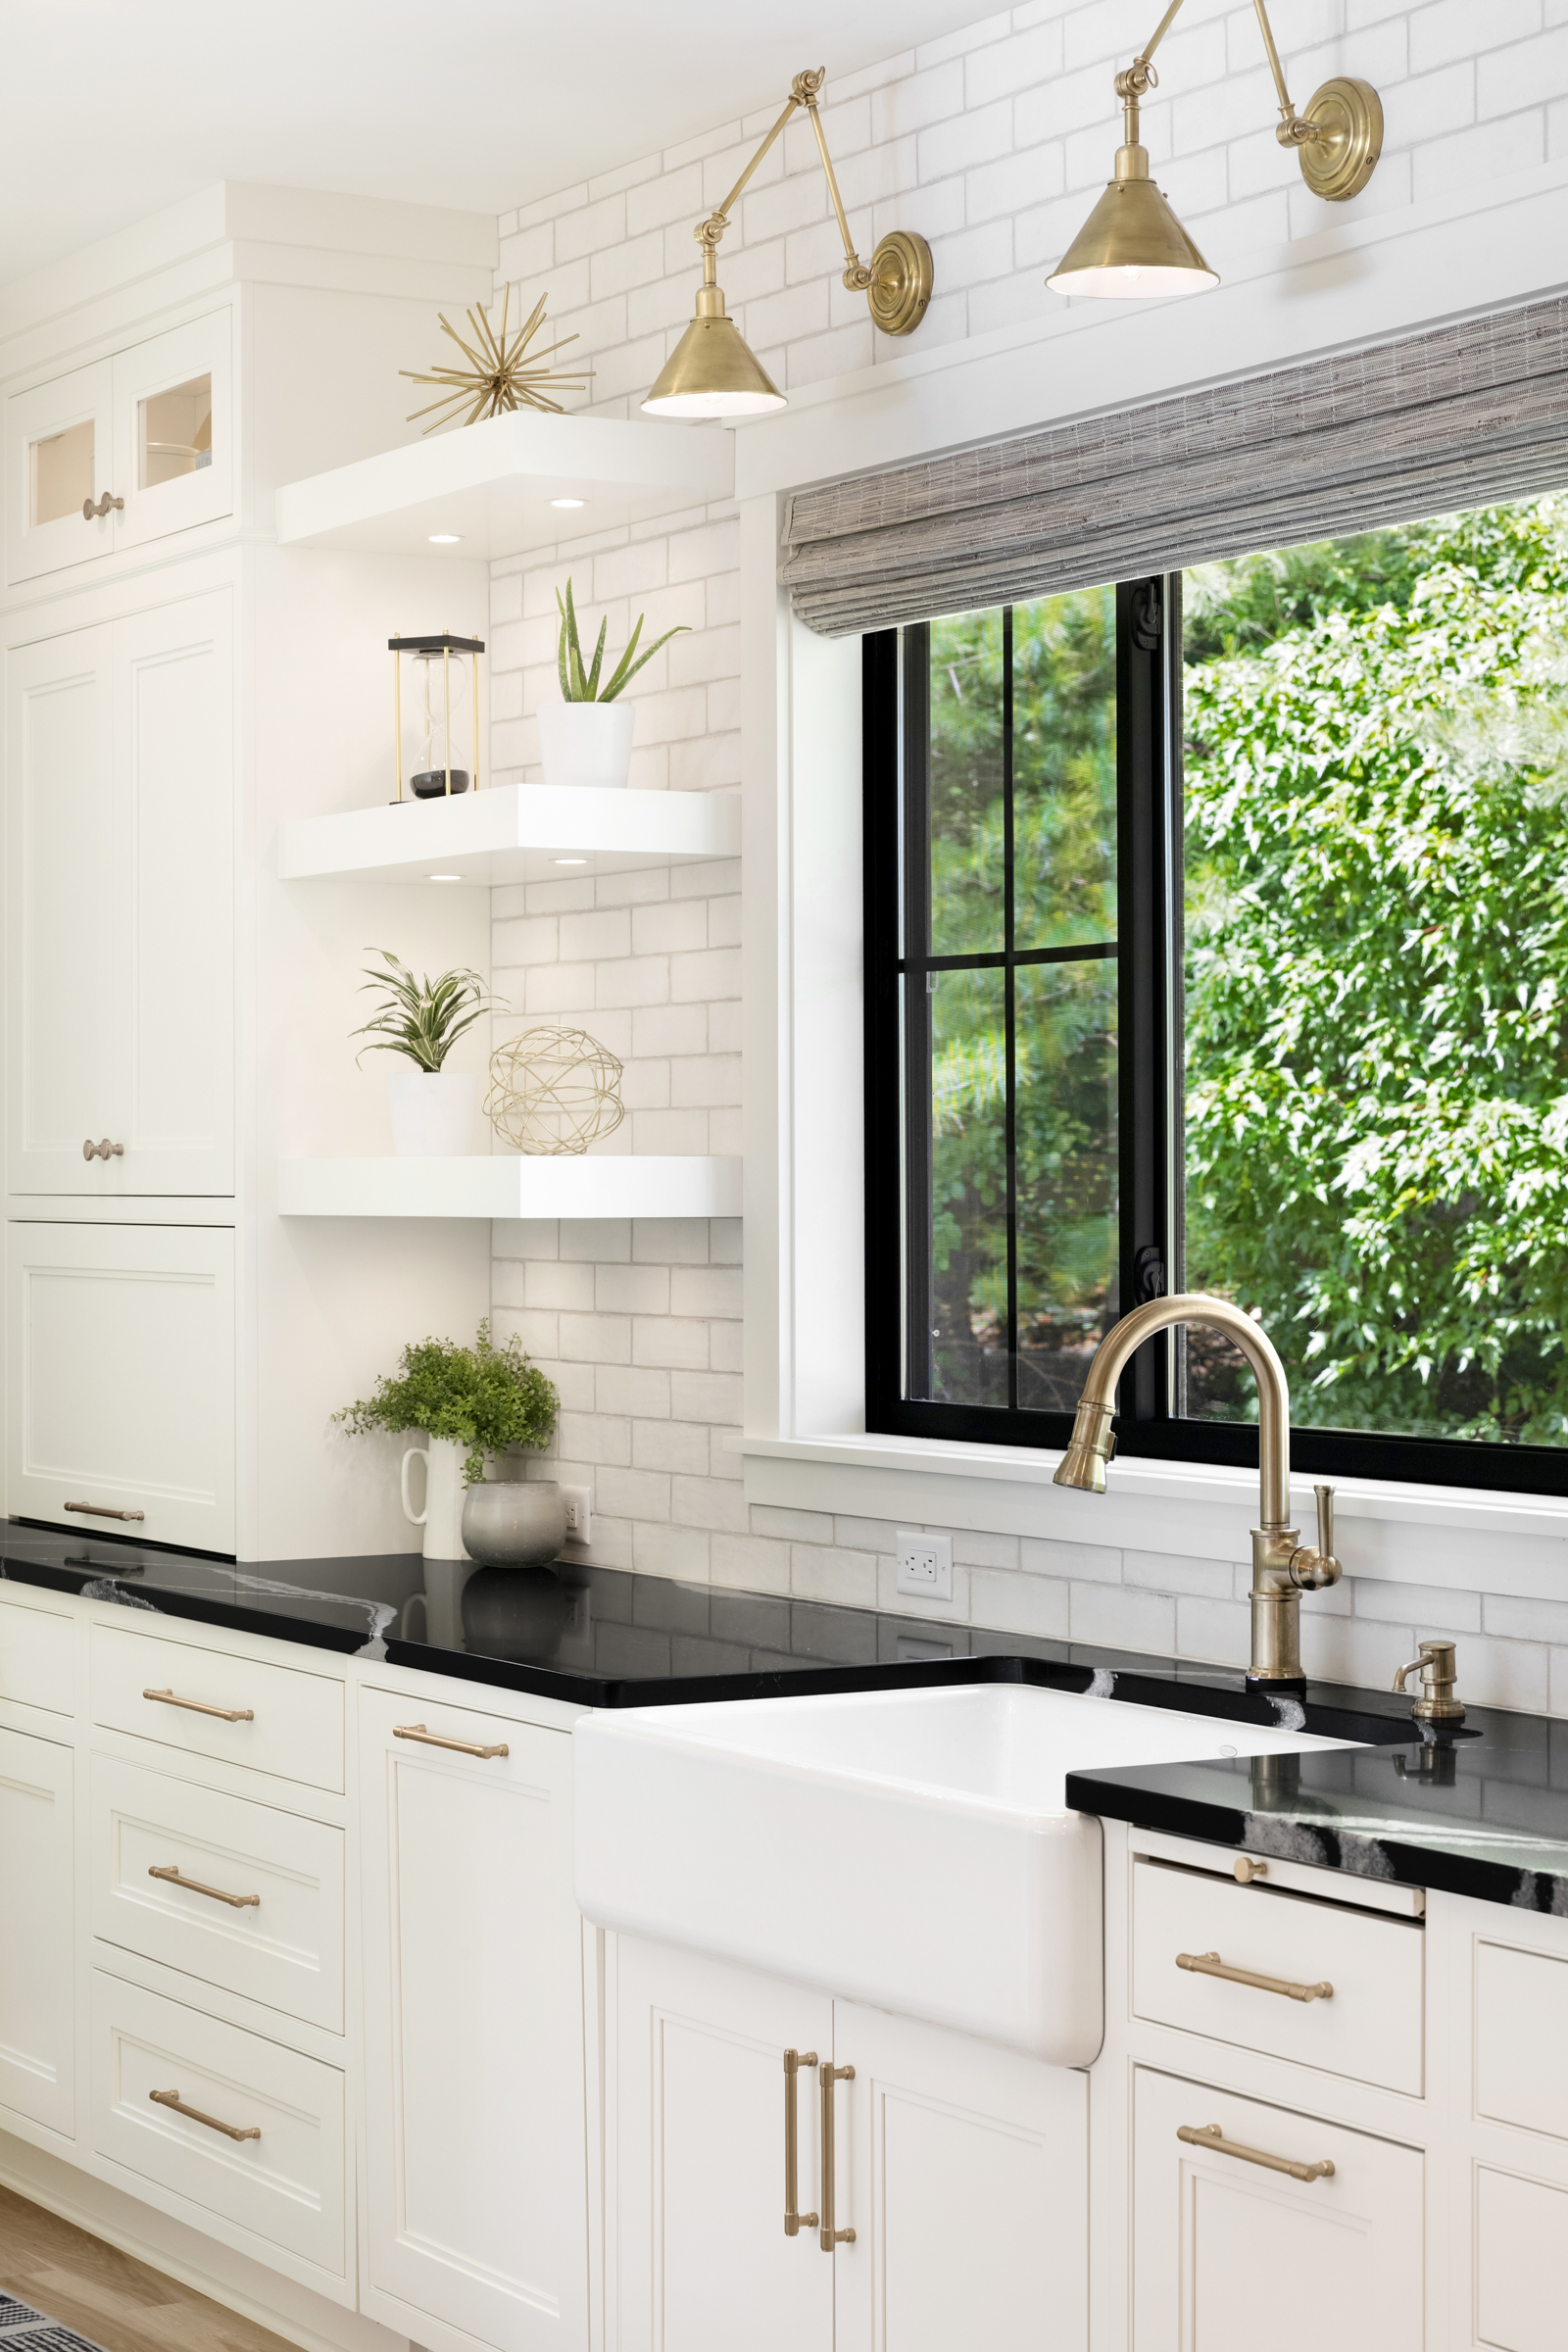 Kitchen remodel with white cabinets, black countertops, and gold fixtures